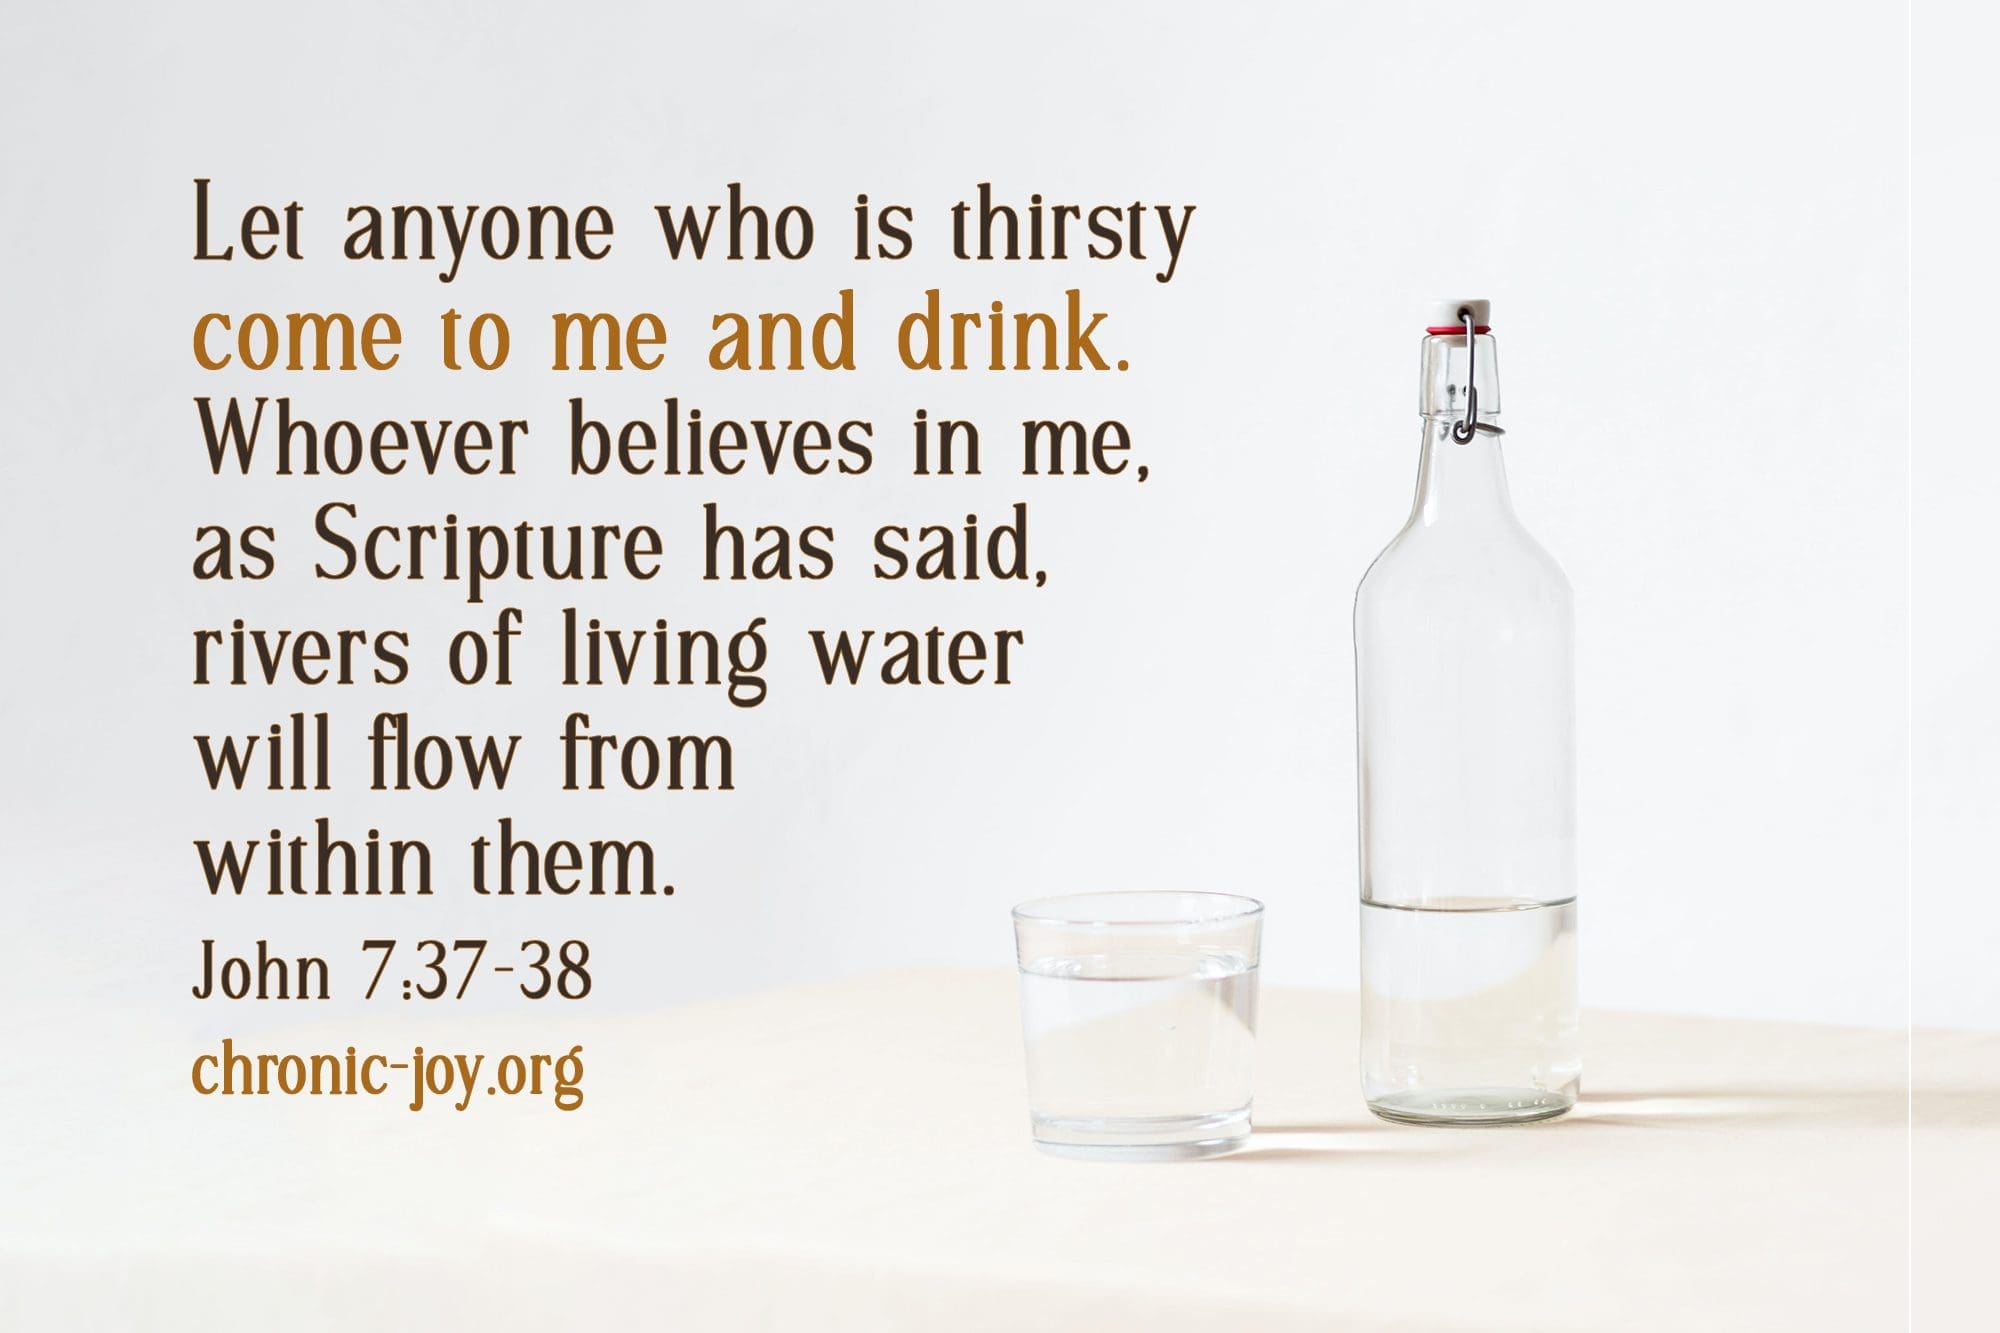 "Let anyone who is thirsty come to me and drink. Whoever believes in me, as Scripture has said, rivers of living water will flow from within them." John 7:37-38